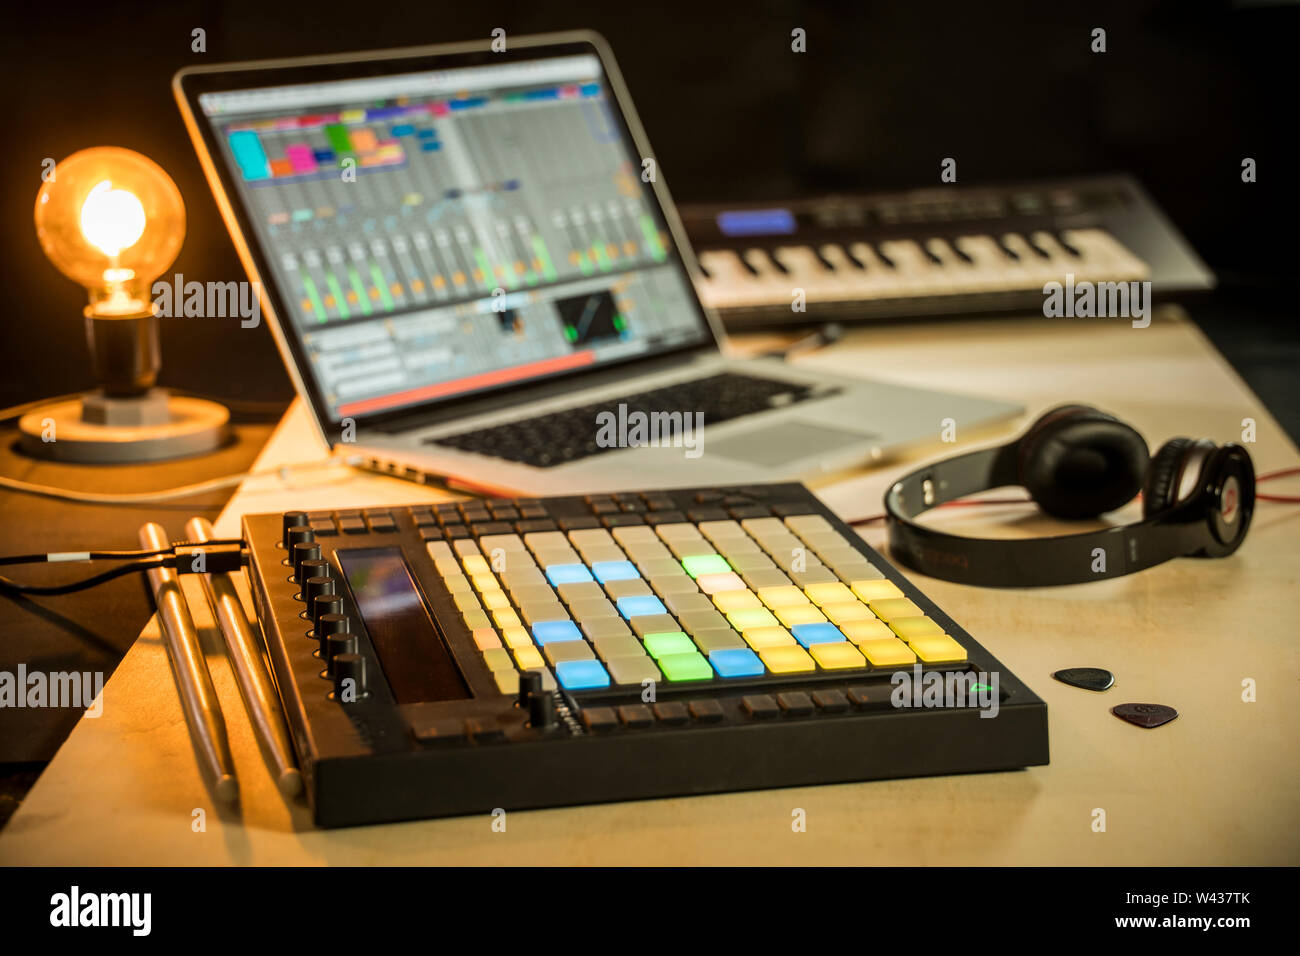 Electronic music production - Apple Macbook with Ableton Live music software, Push midi pad controller Stock Photo